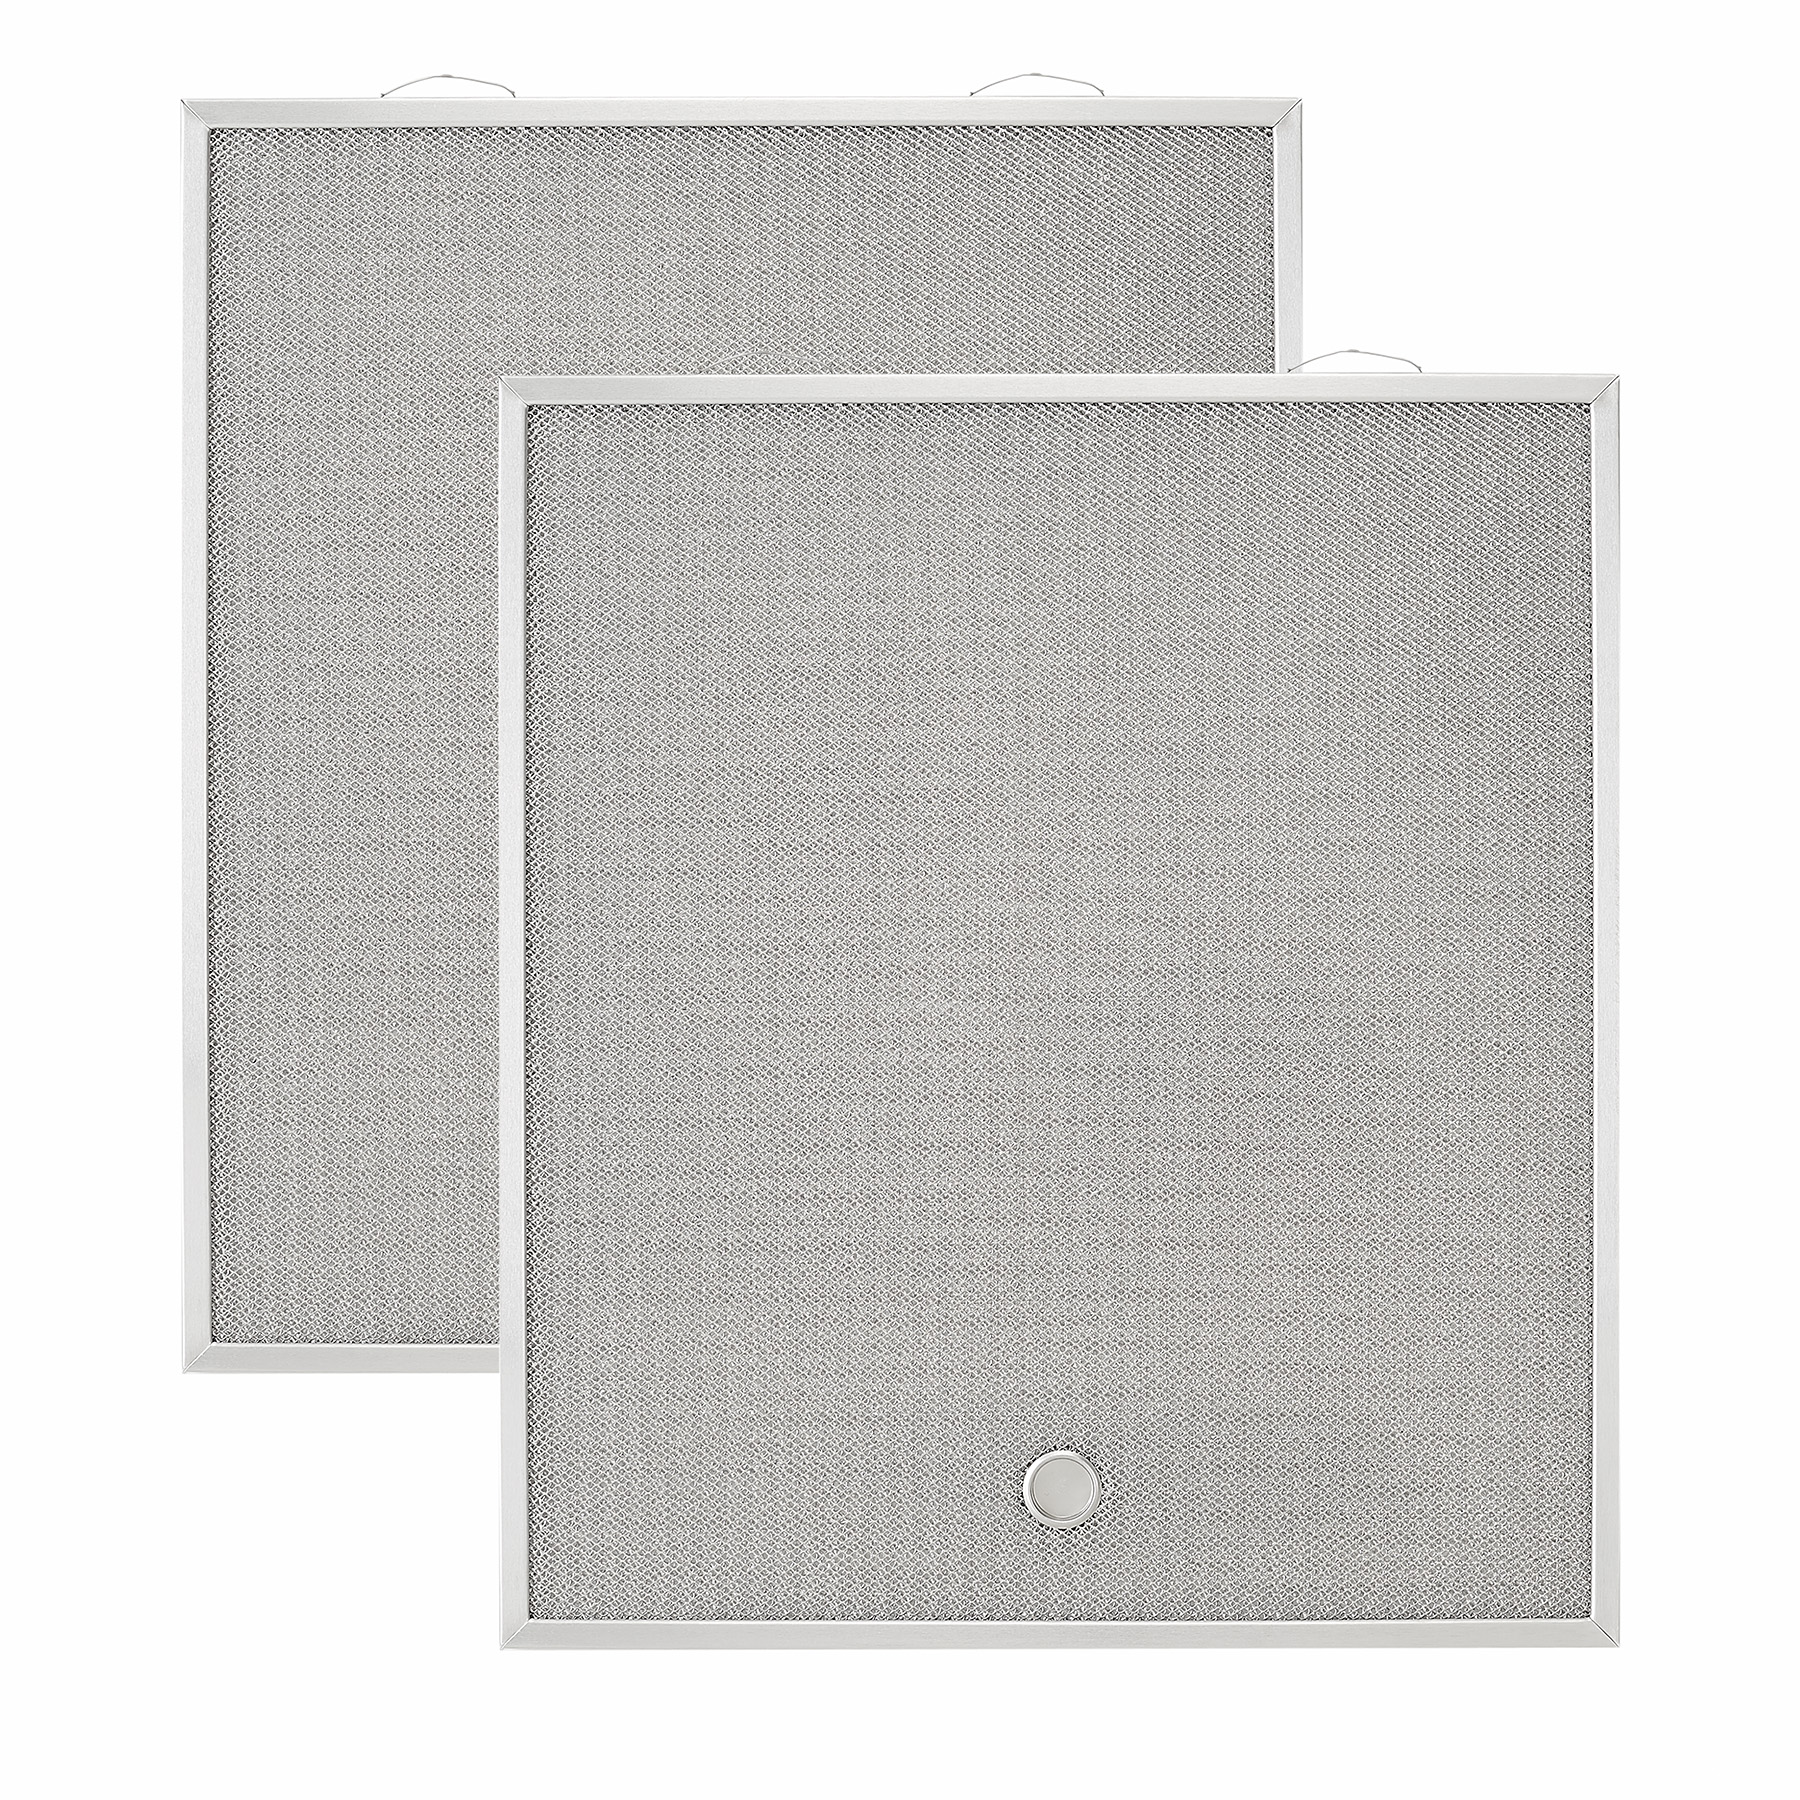 HPFAMM30 Replacement Micro Mesh Aluminum Grease Filters (C2) for